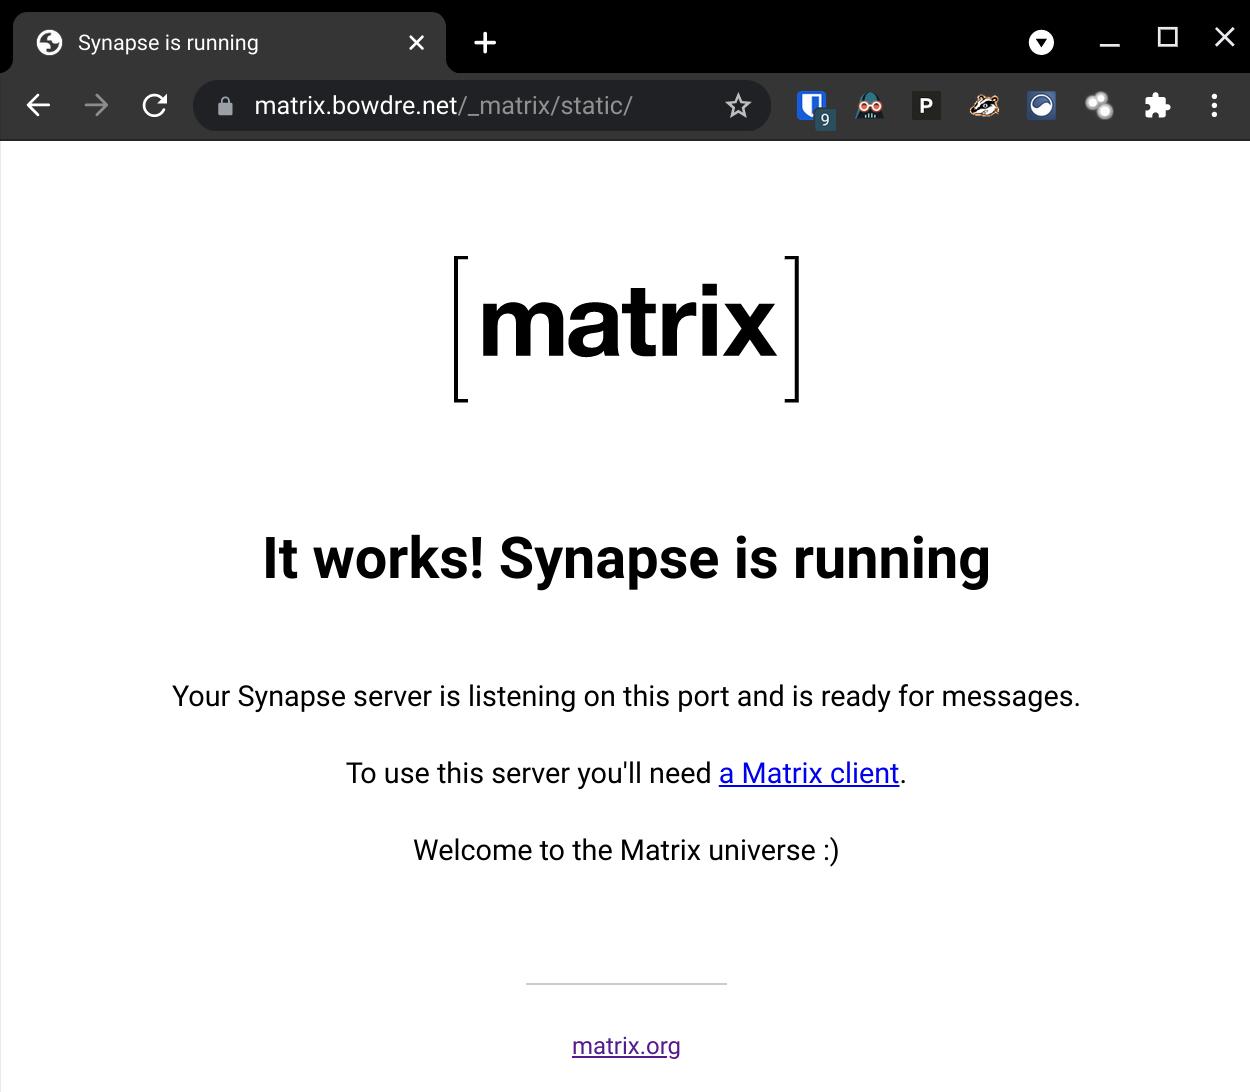 Synapse is running!